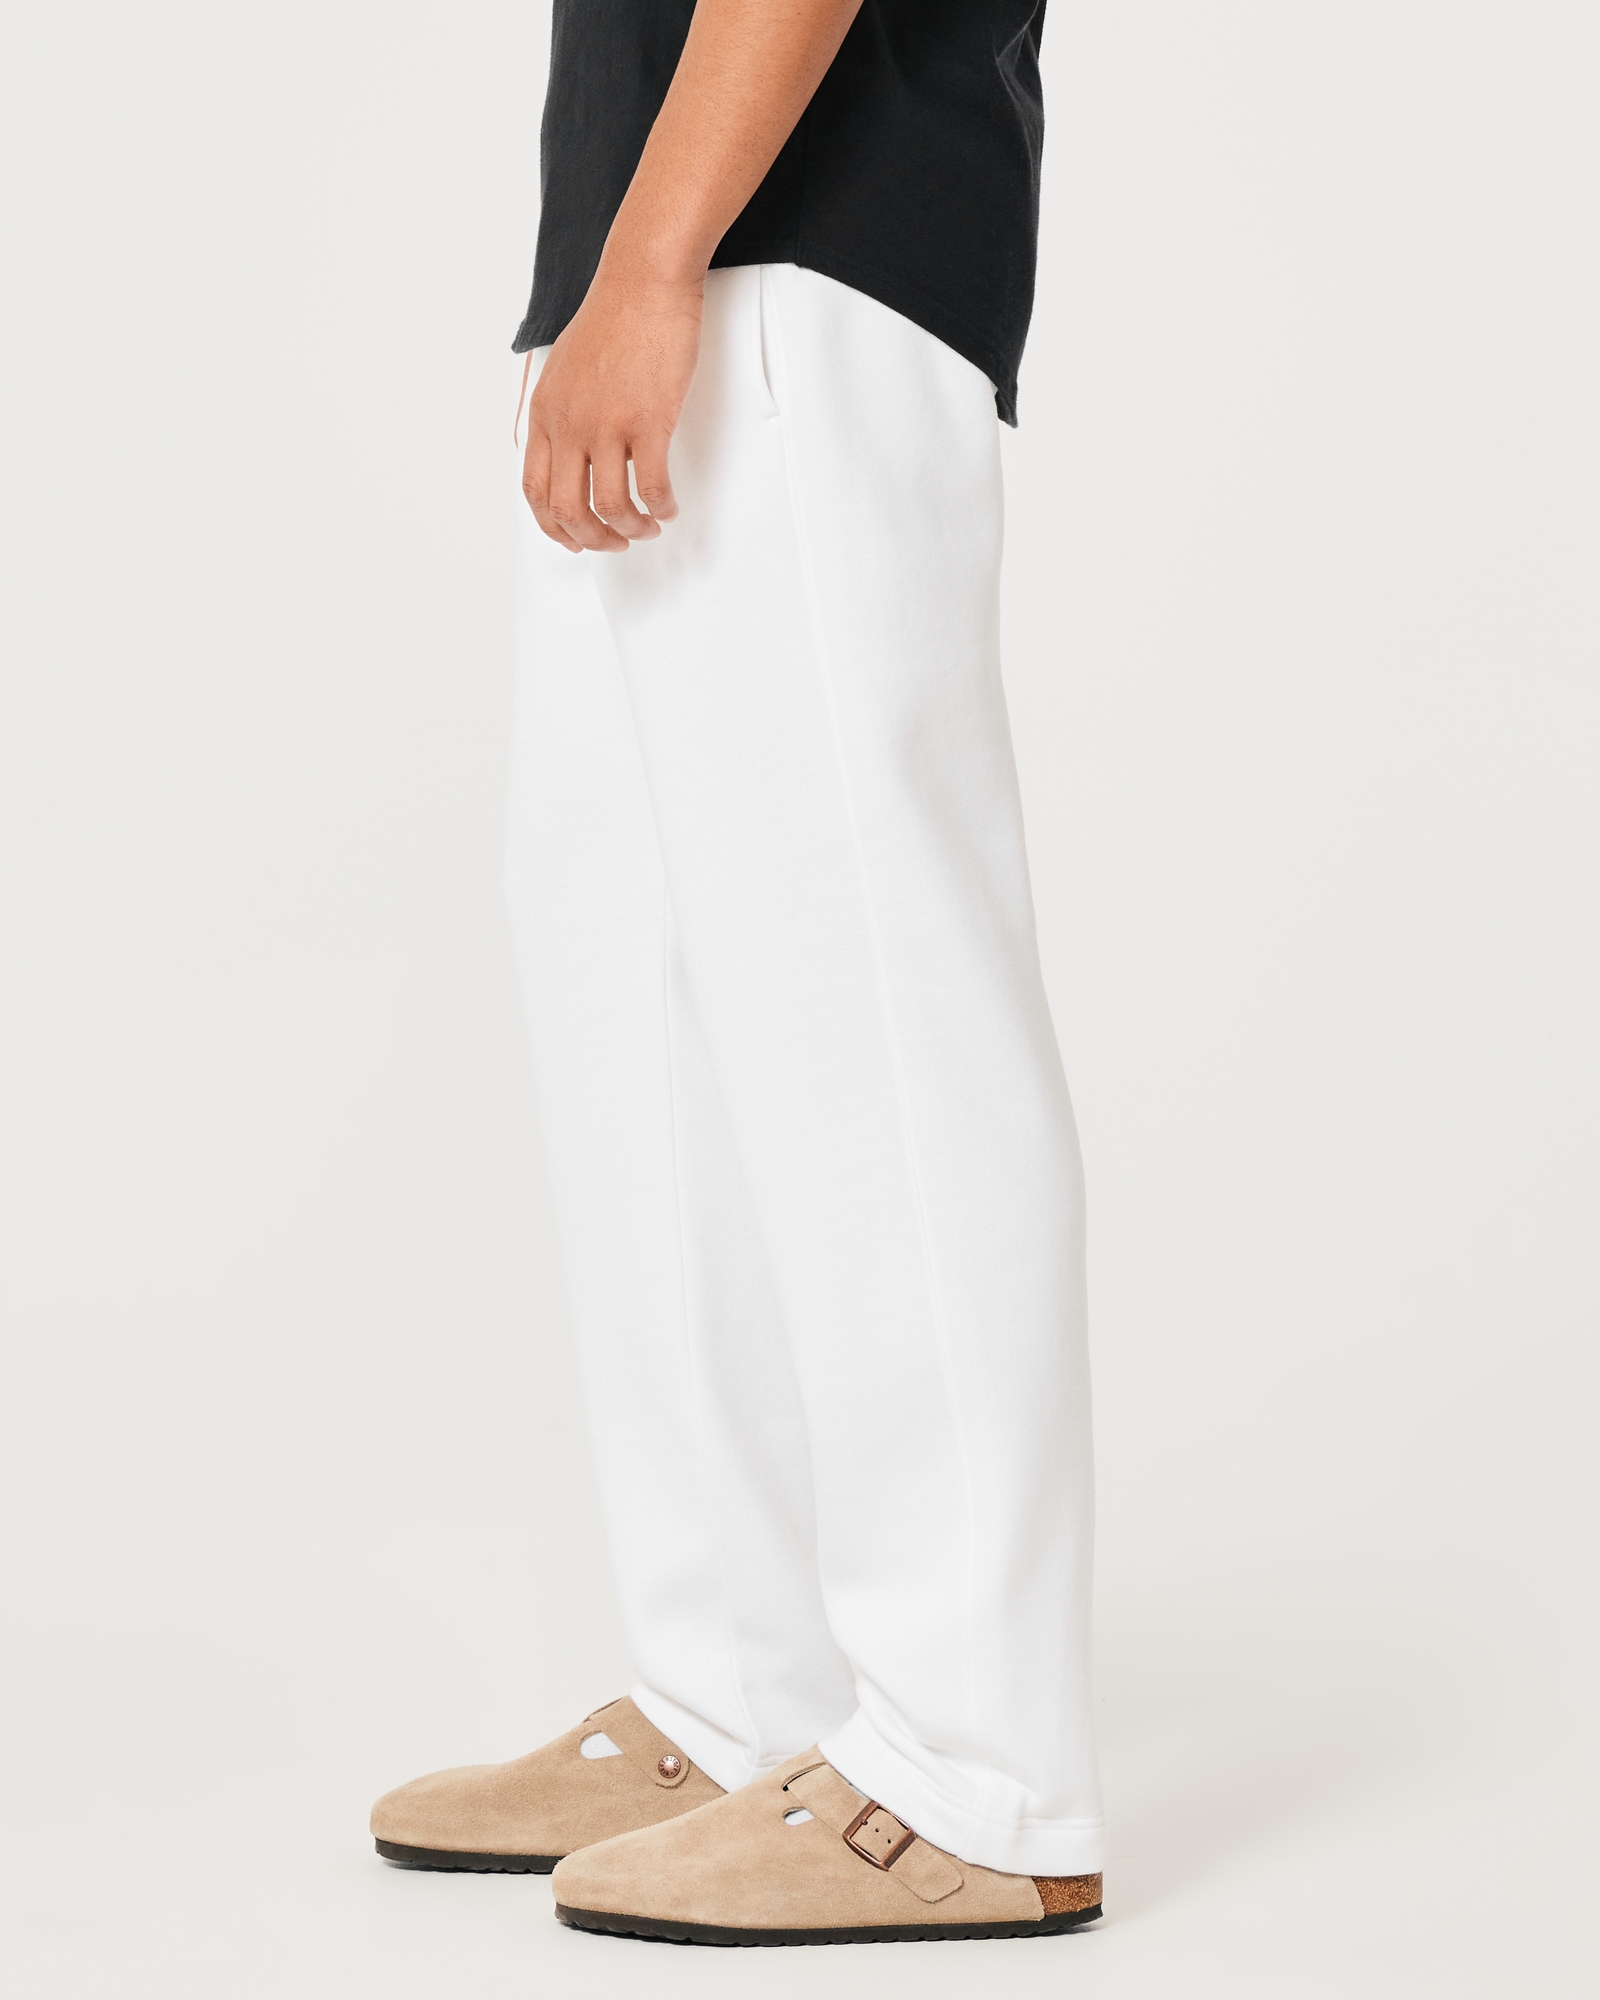 High-rise Straight-leg Sweatpants from Hollister on 21 Buttons